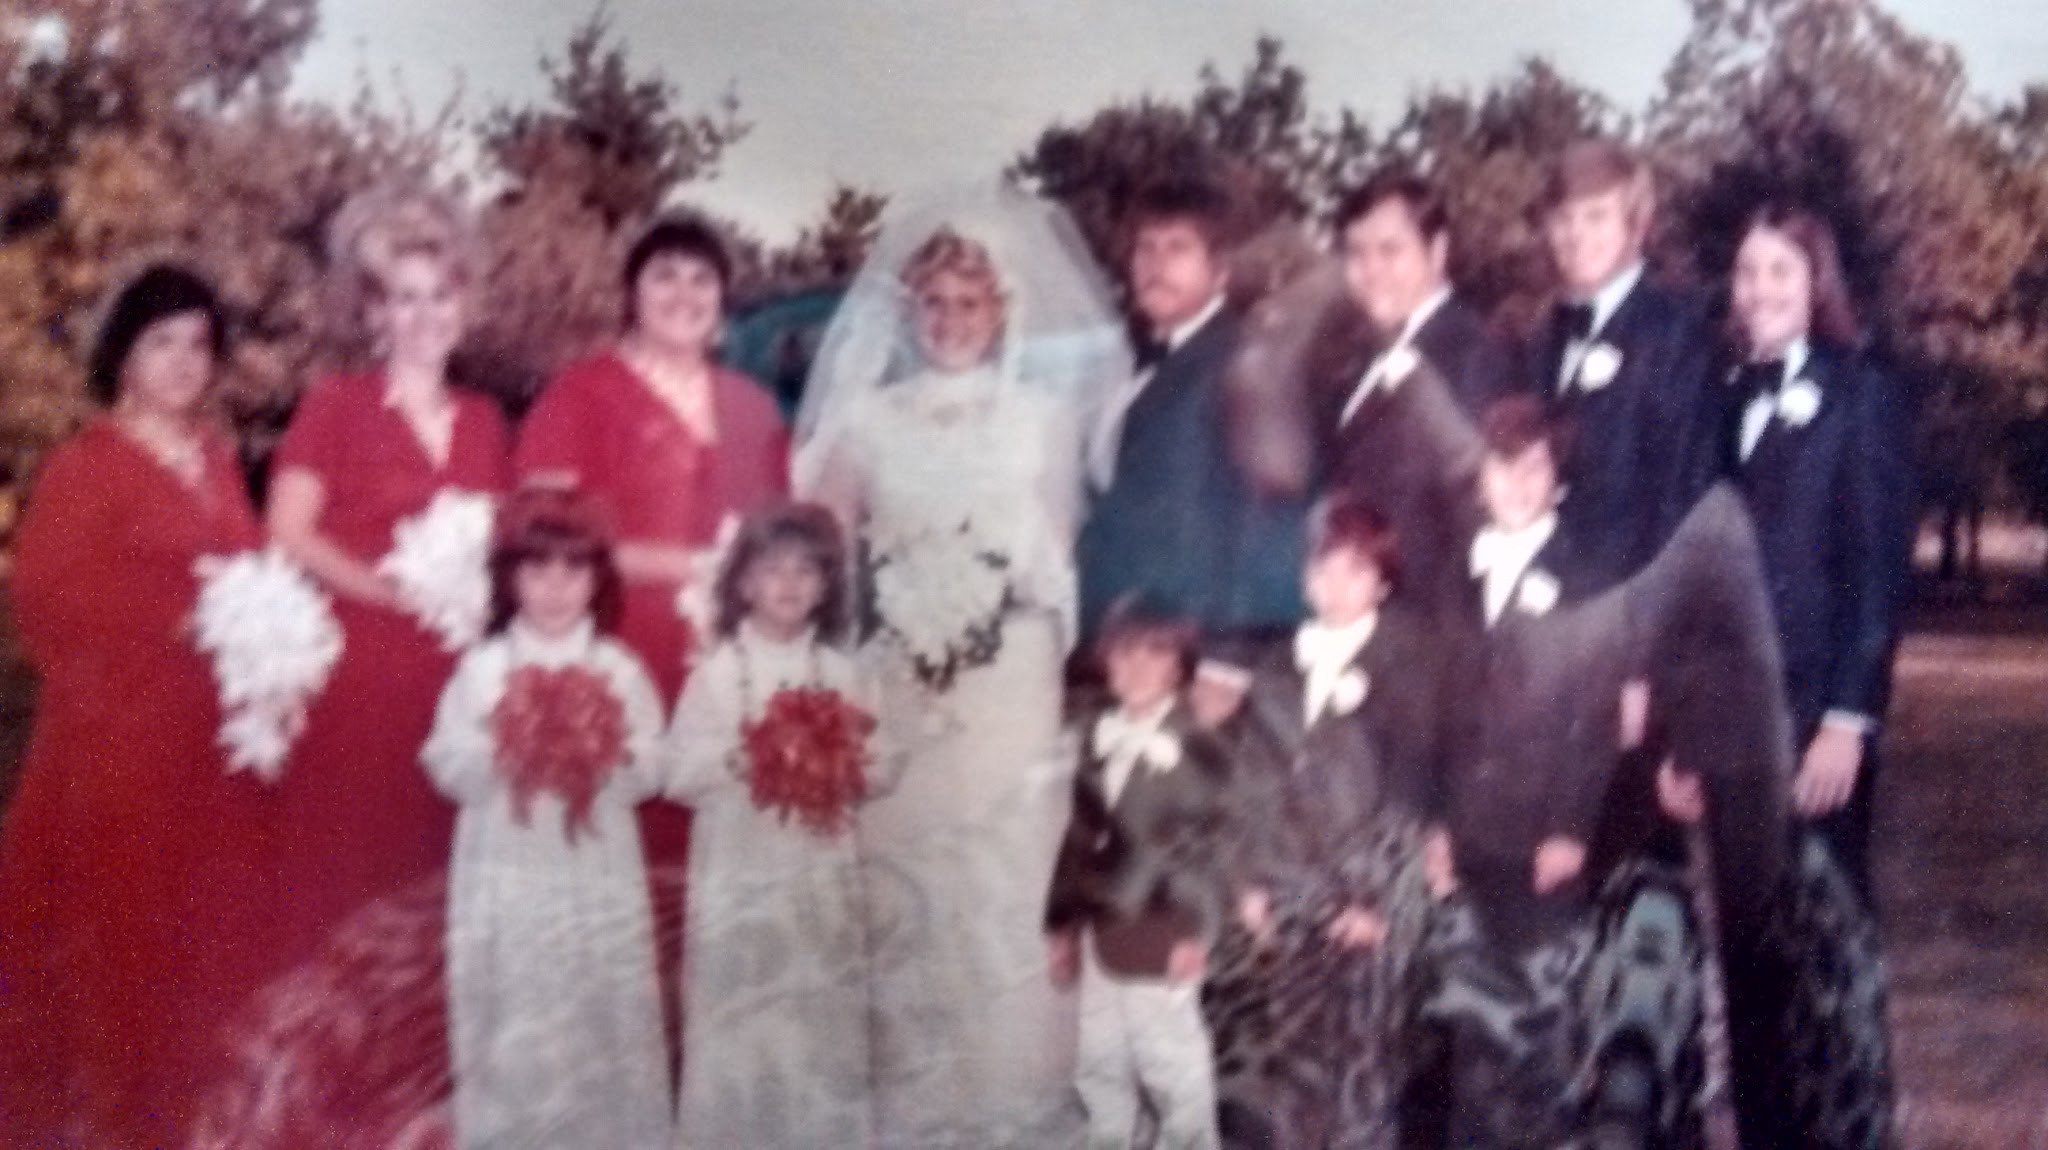 Larry as Best Man at our wedding 1974